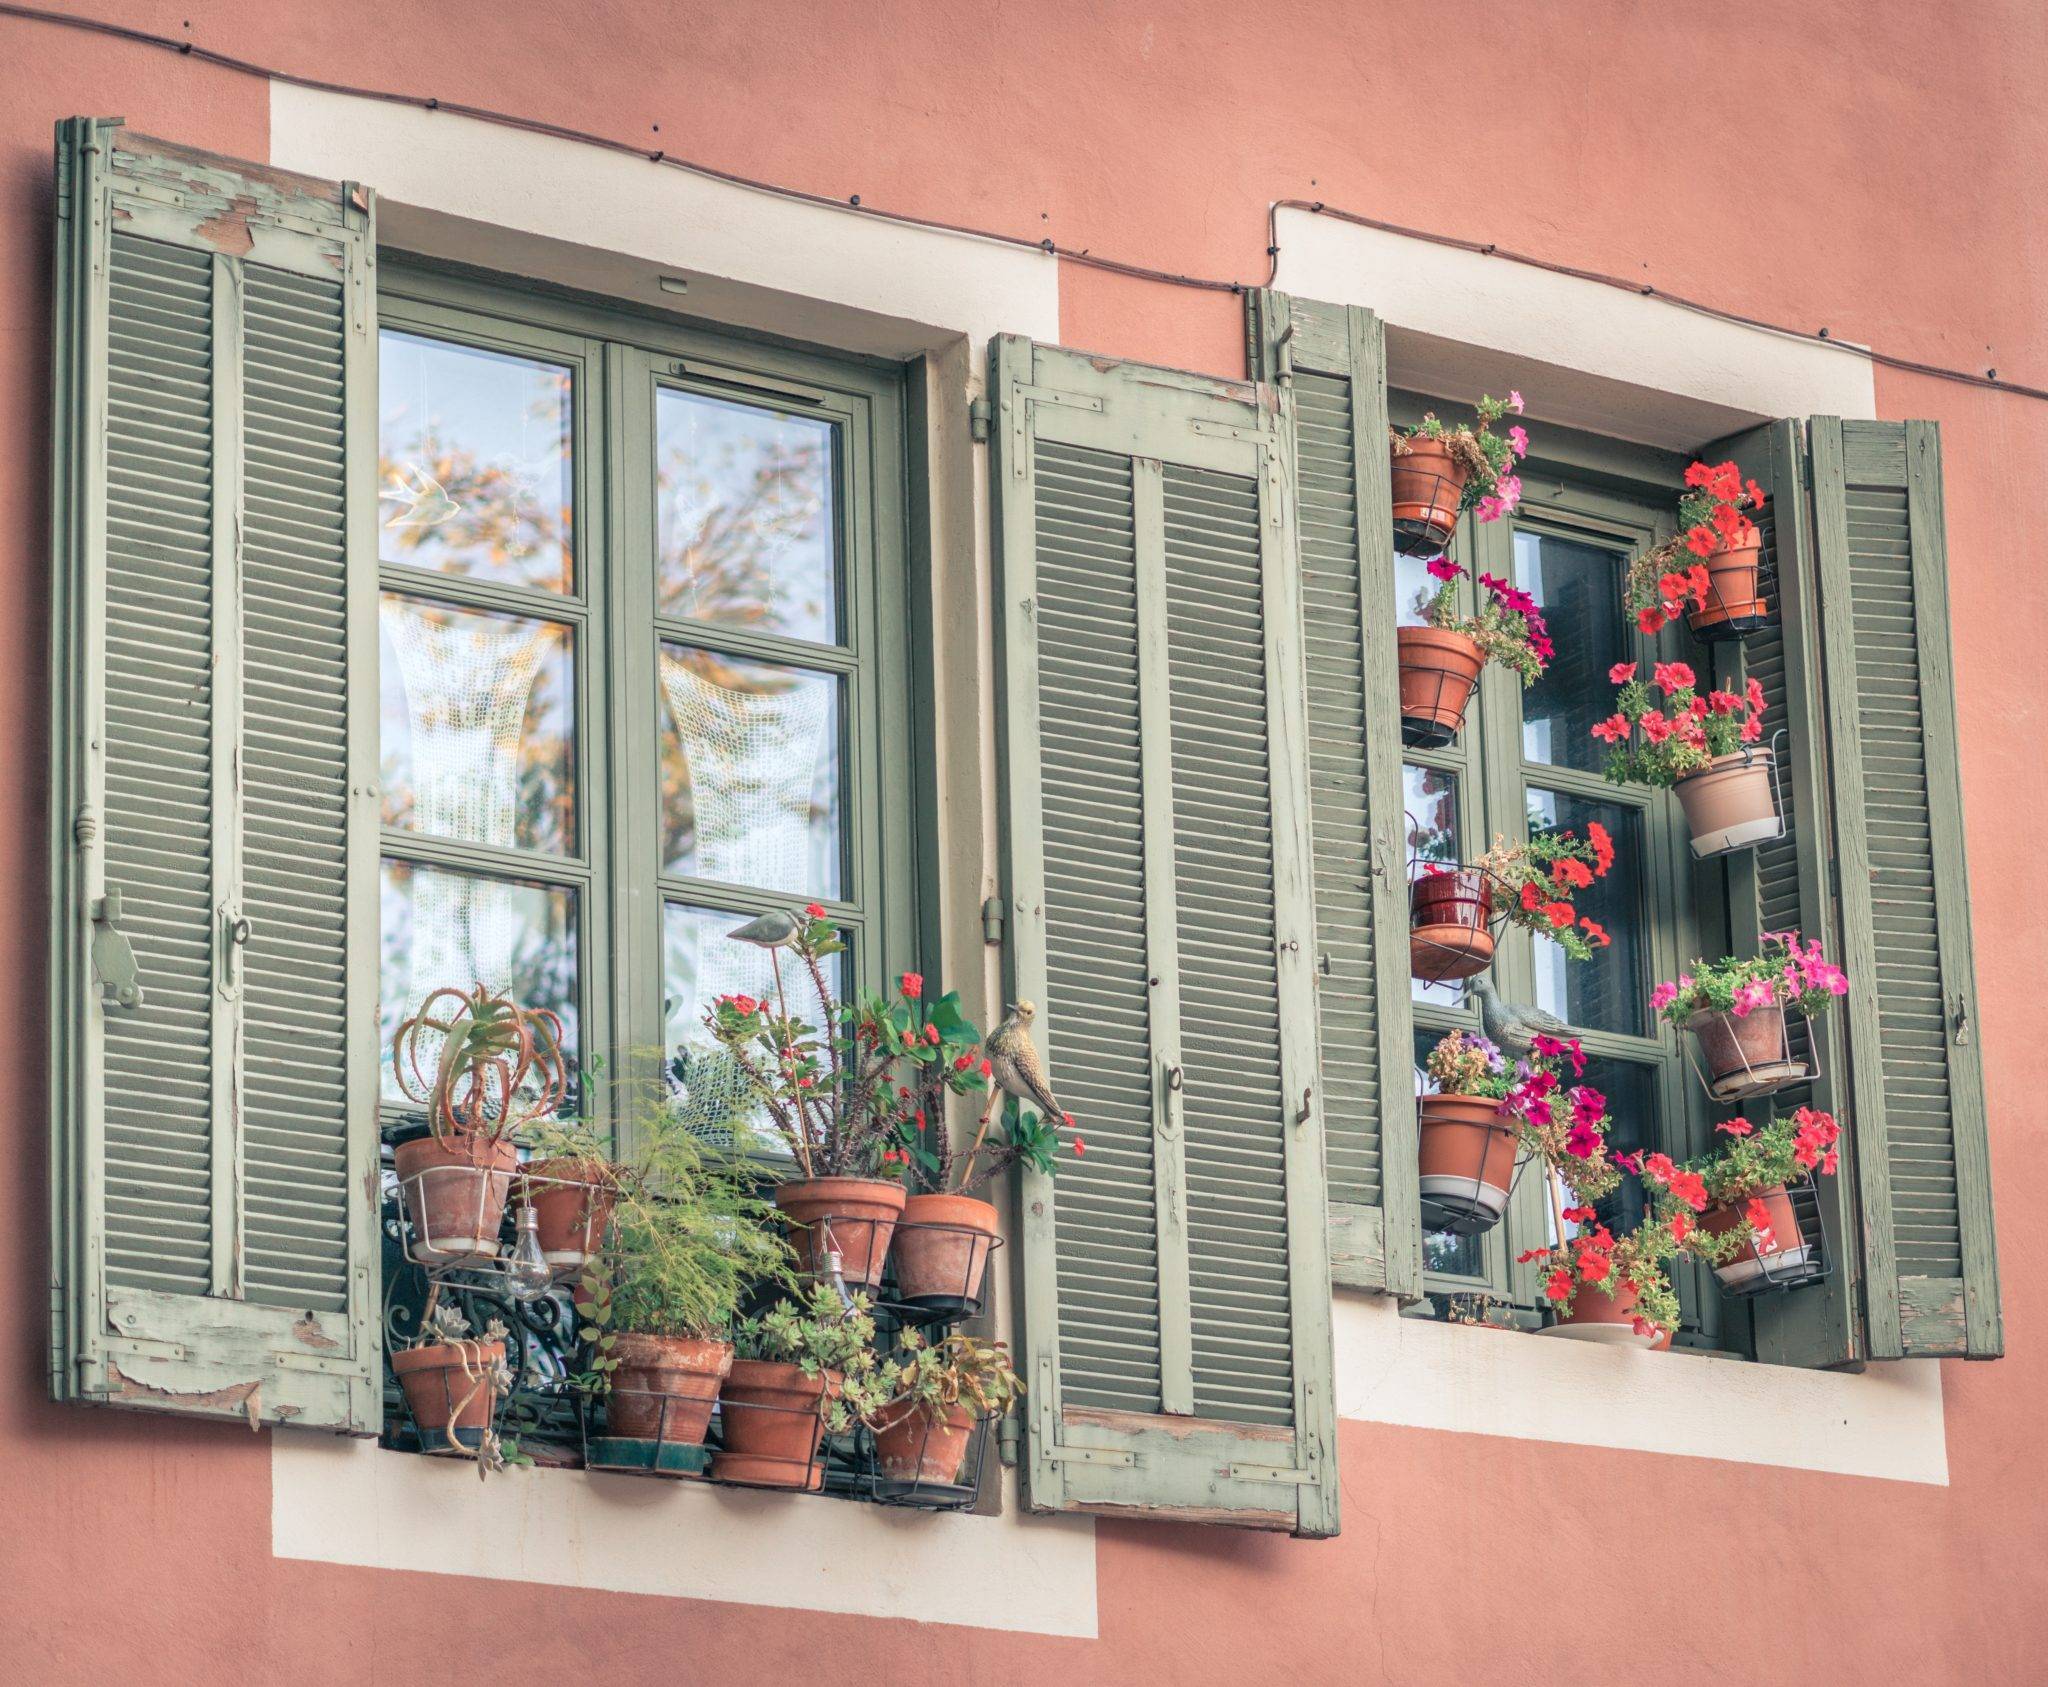 Airbnb Hosting An Airbnb hosting listing featuring a picturesque window adorned with green shutters.